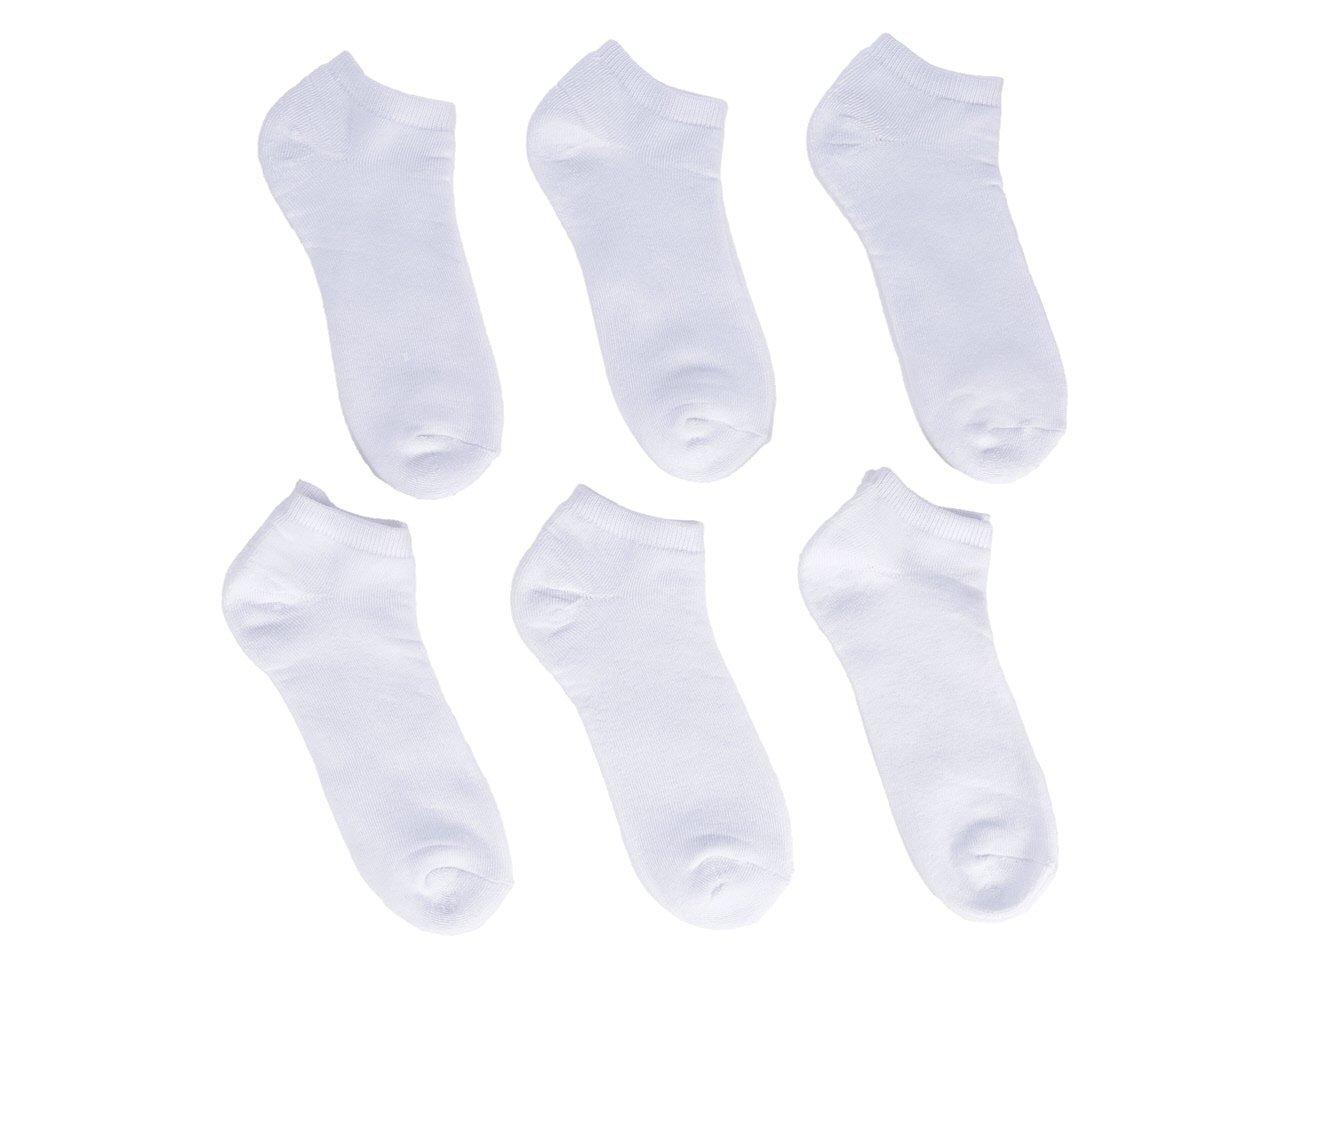 Sof Sole Adult 6 Pair No Show